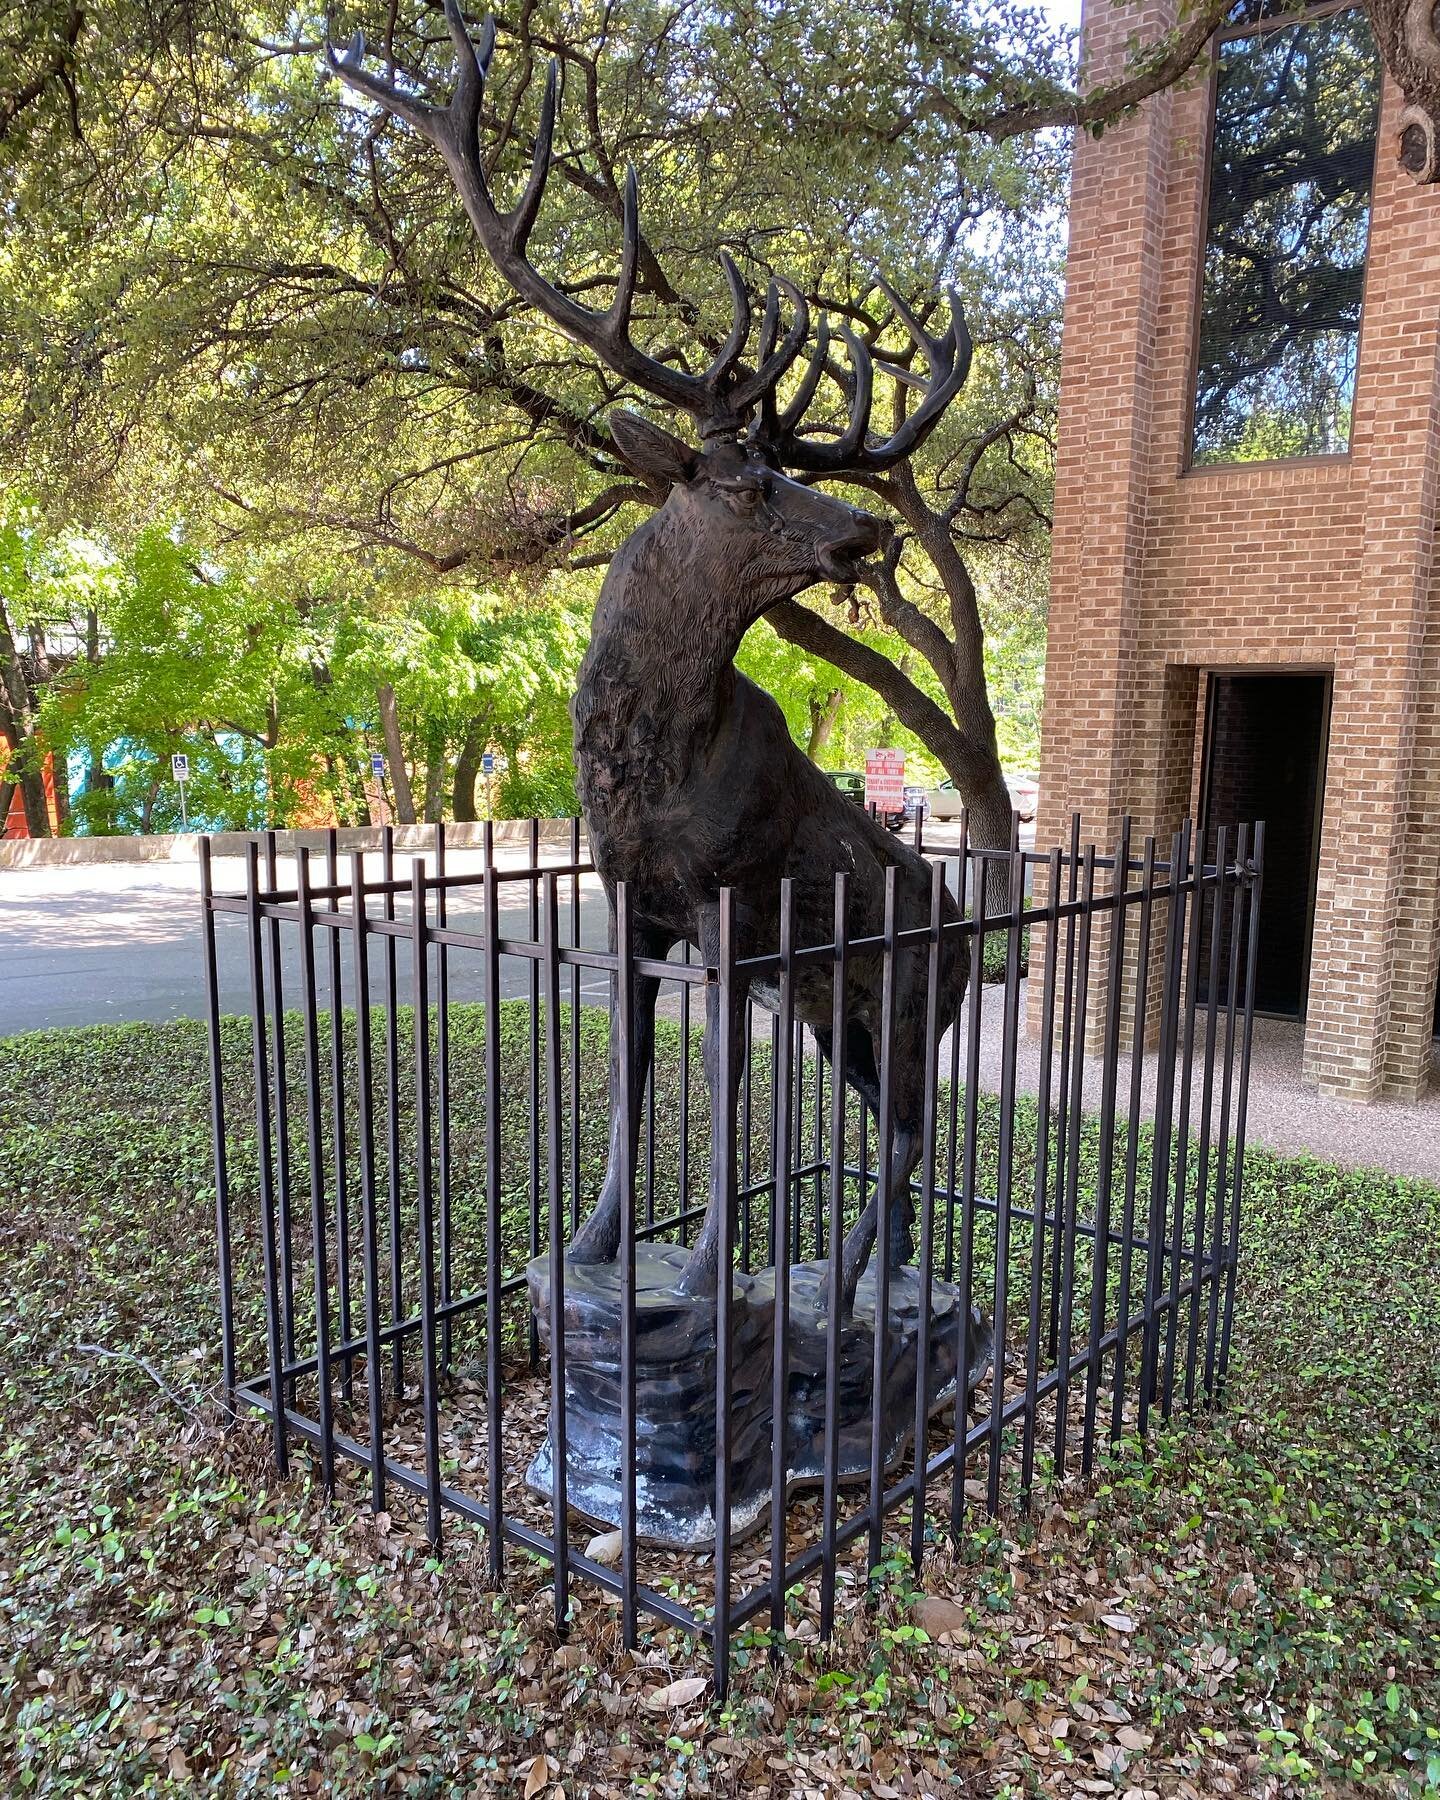 Public art found in Austin, Texas &hellip; I&rsquo;m not sure if the artist who sculpted this deer intended for the cage like fence to surround it like this, but I love it!

#AustinTexas #AnimalSculpture #PublicArt